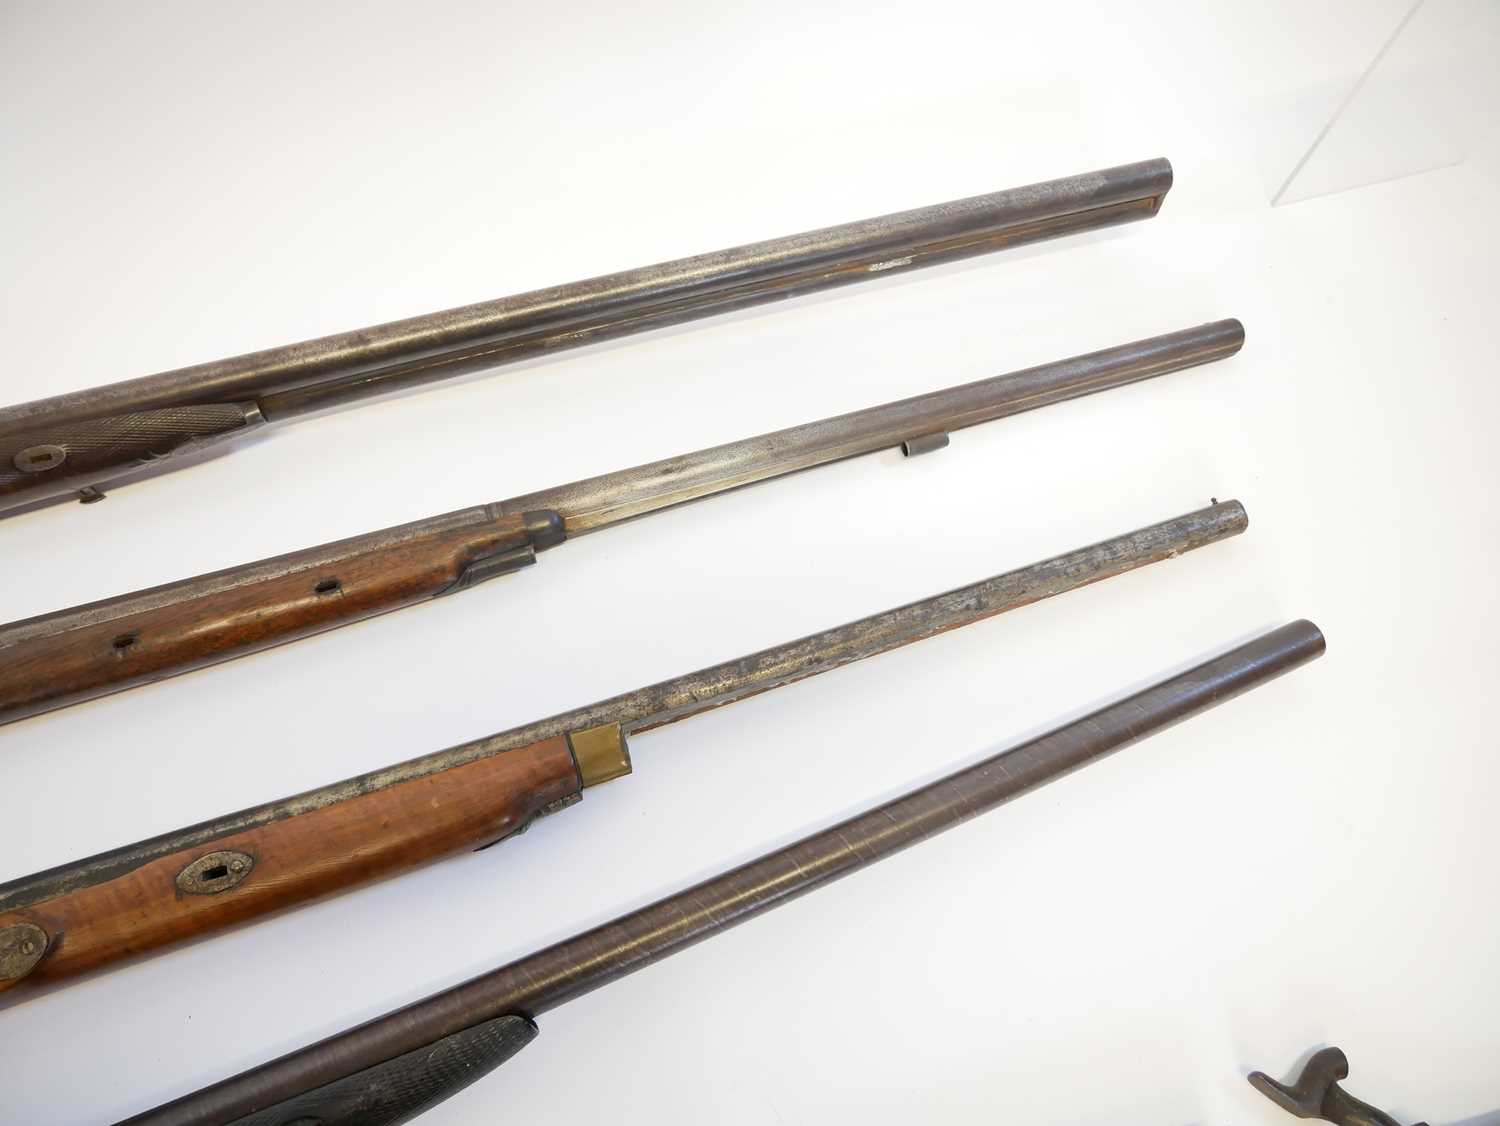 Four percussion shotguns for restoration, one a double barrel, the other three single barrels one by - Image 10 of 21